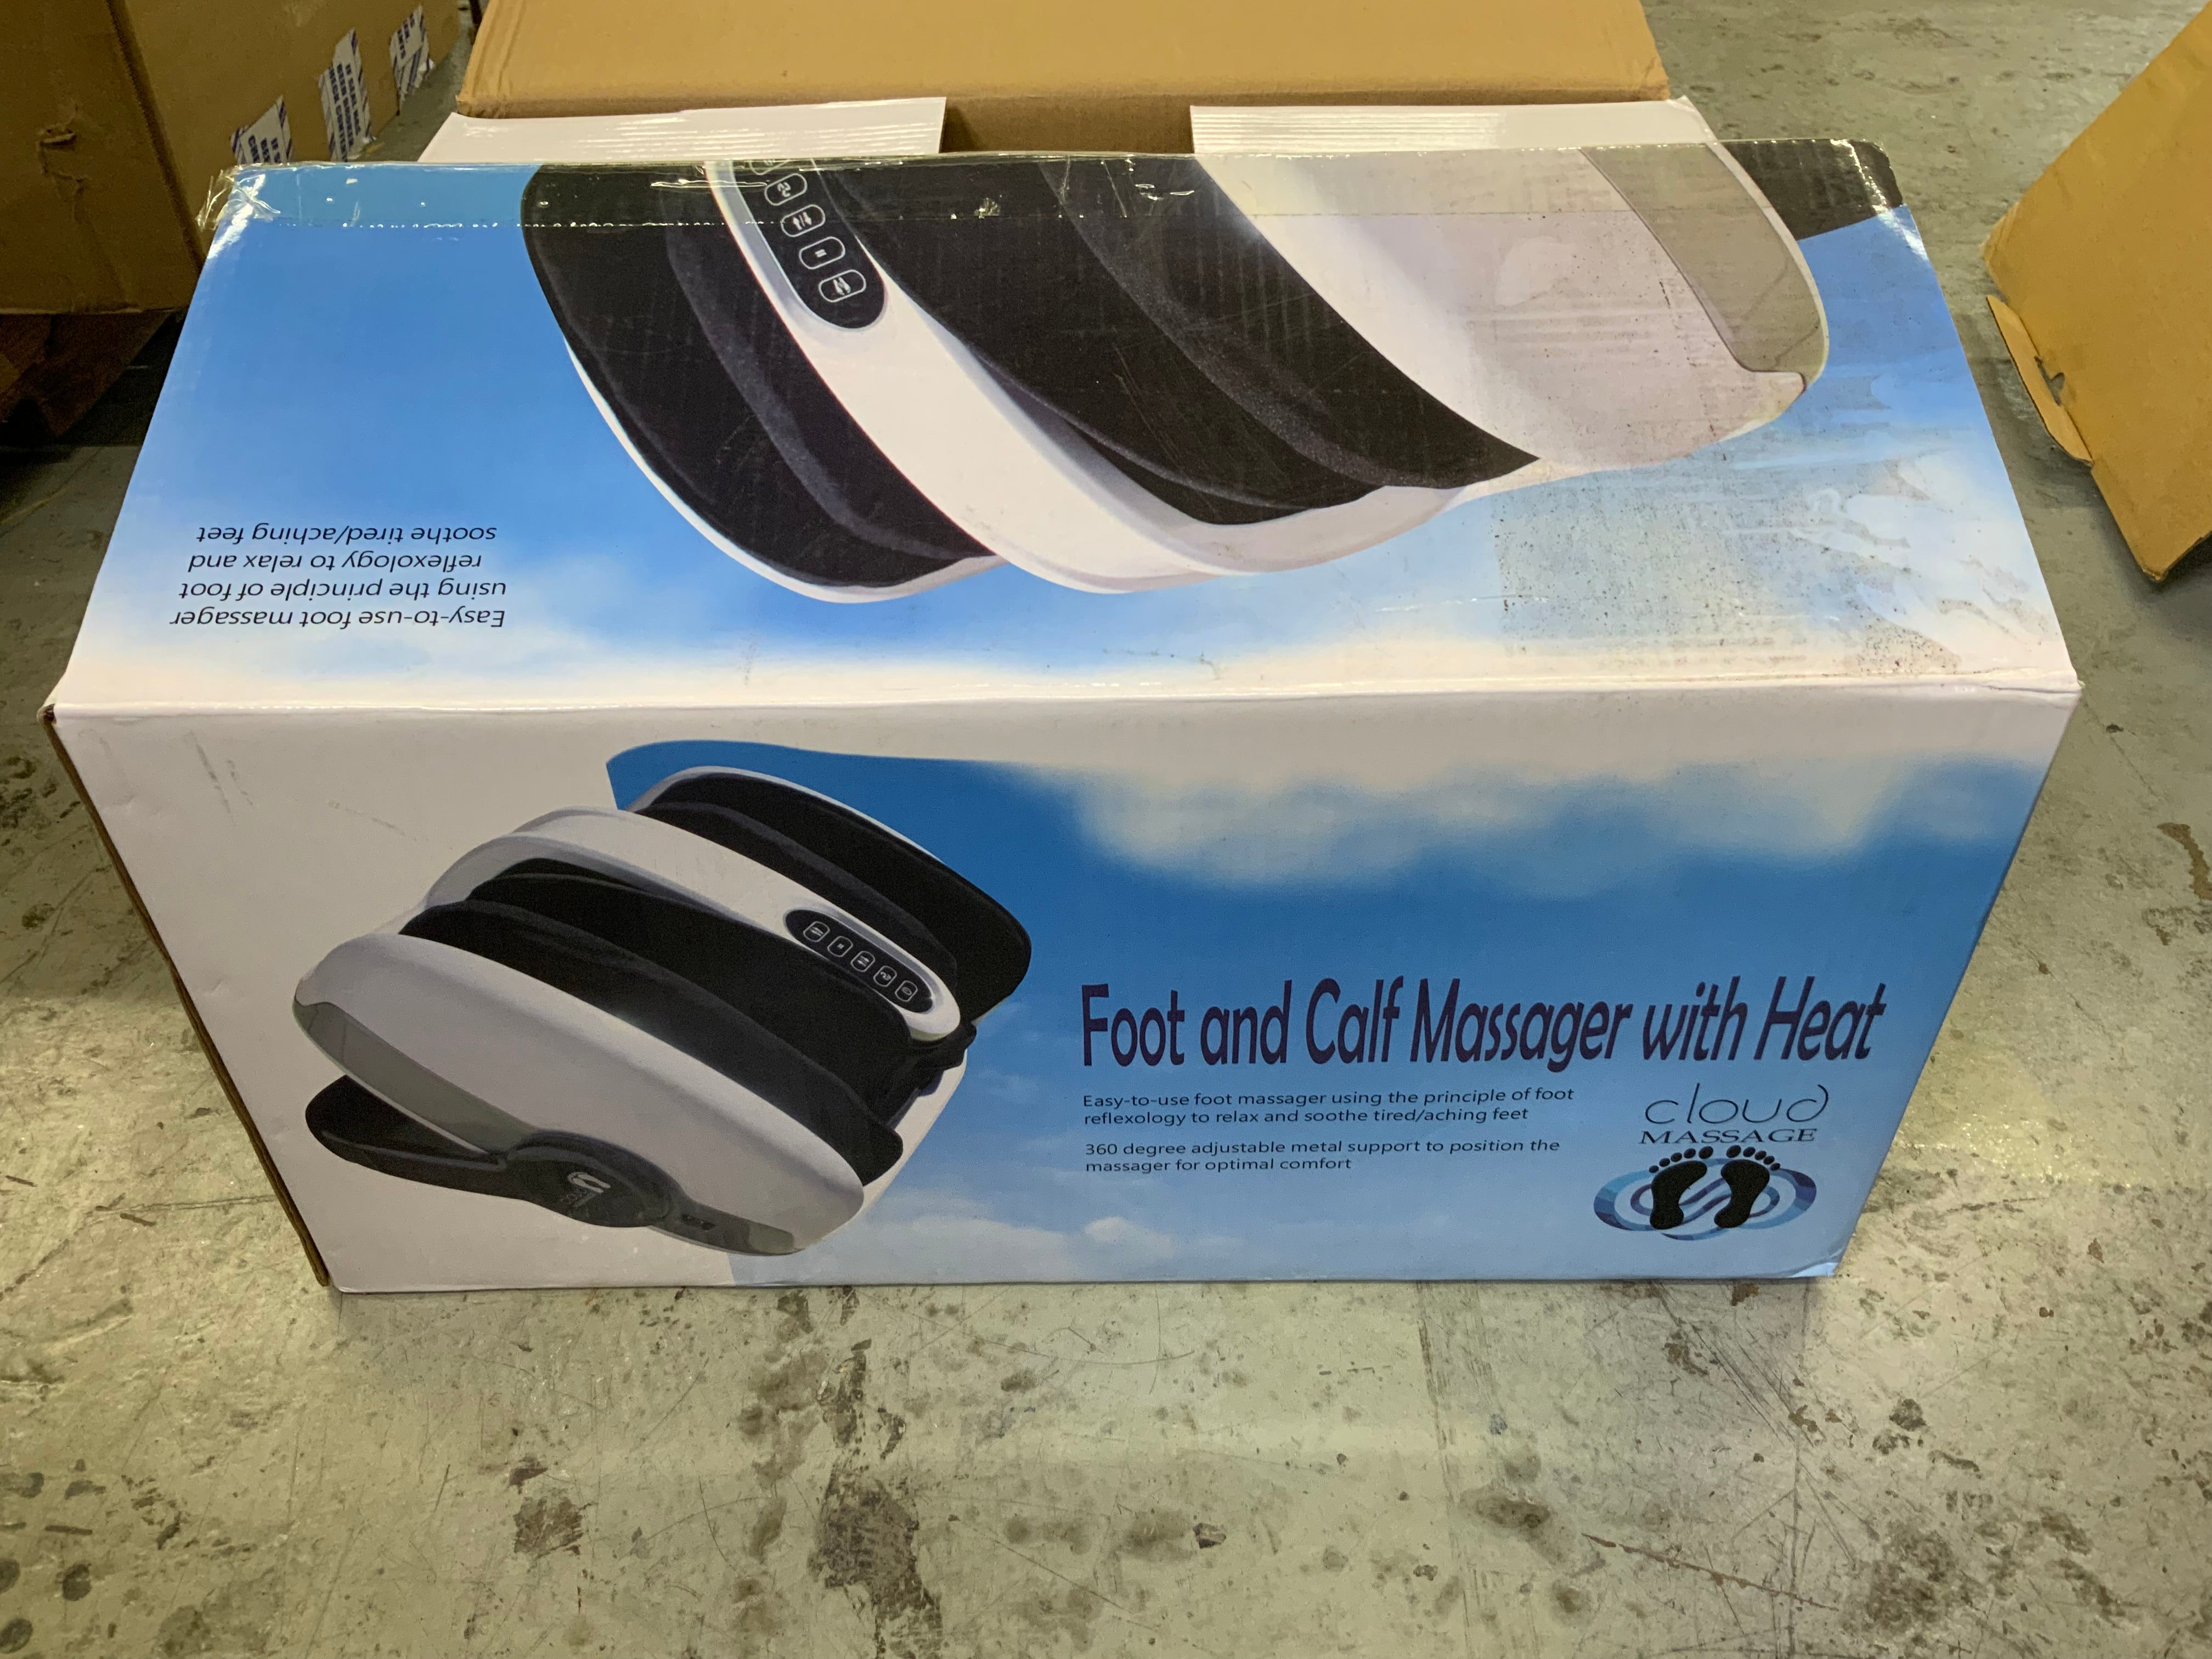 Cloud Massage Shiatsu Foot Massager for Circulation and Pain Relief (8183283155182)